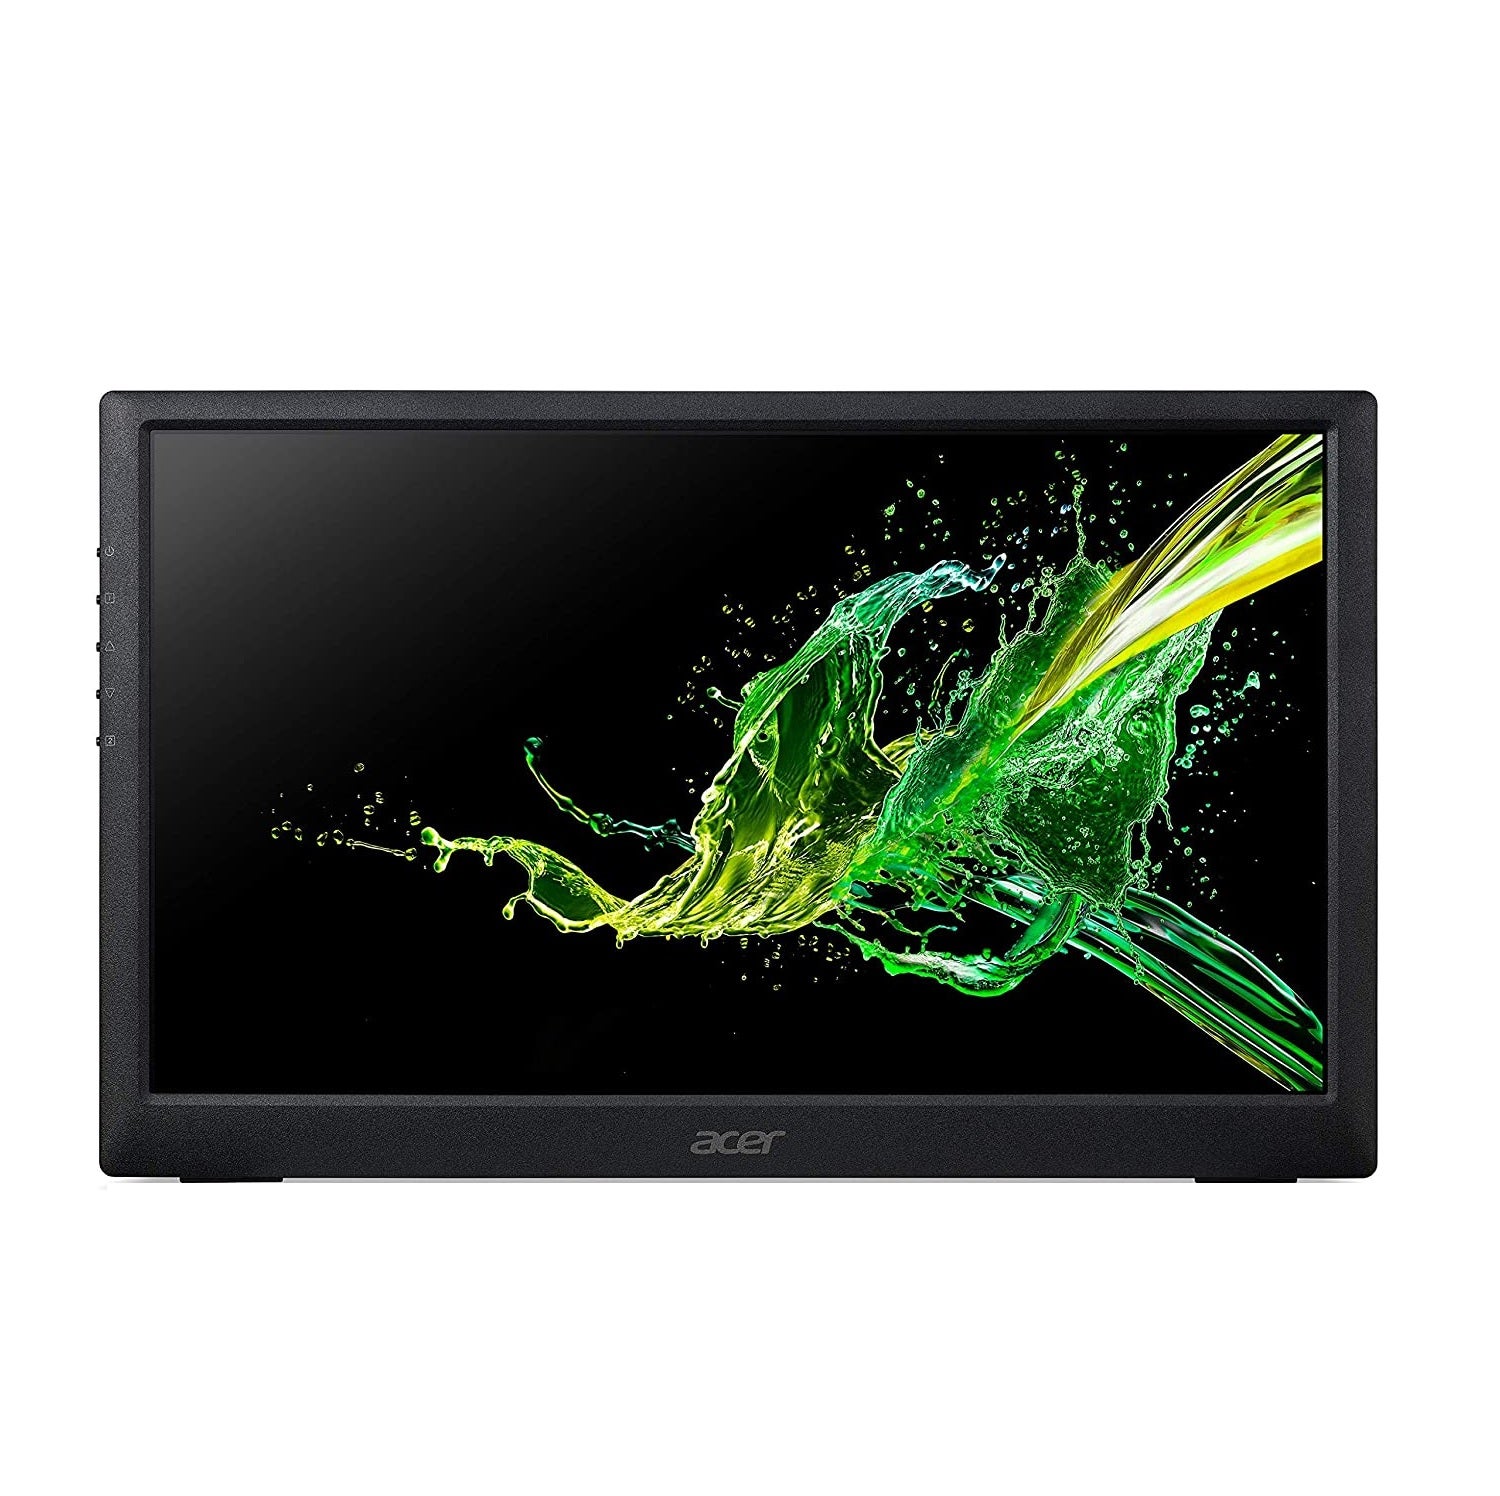 Acer PM161Q 15.6inch LED Portable Monitor